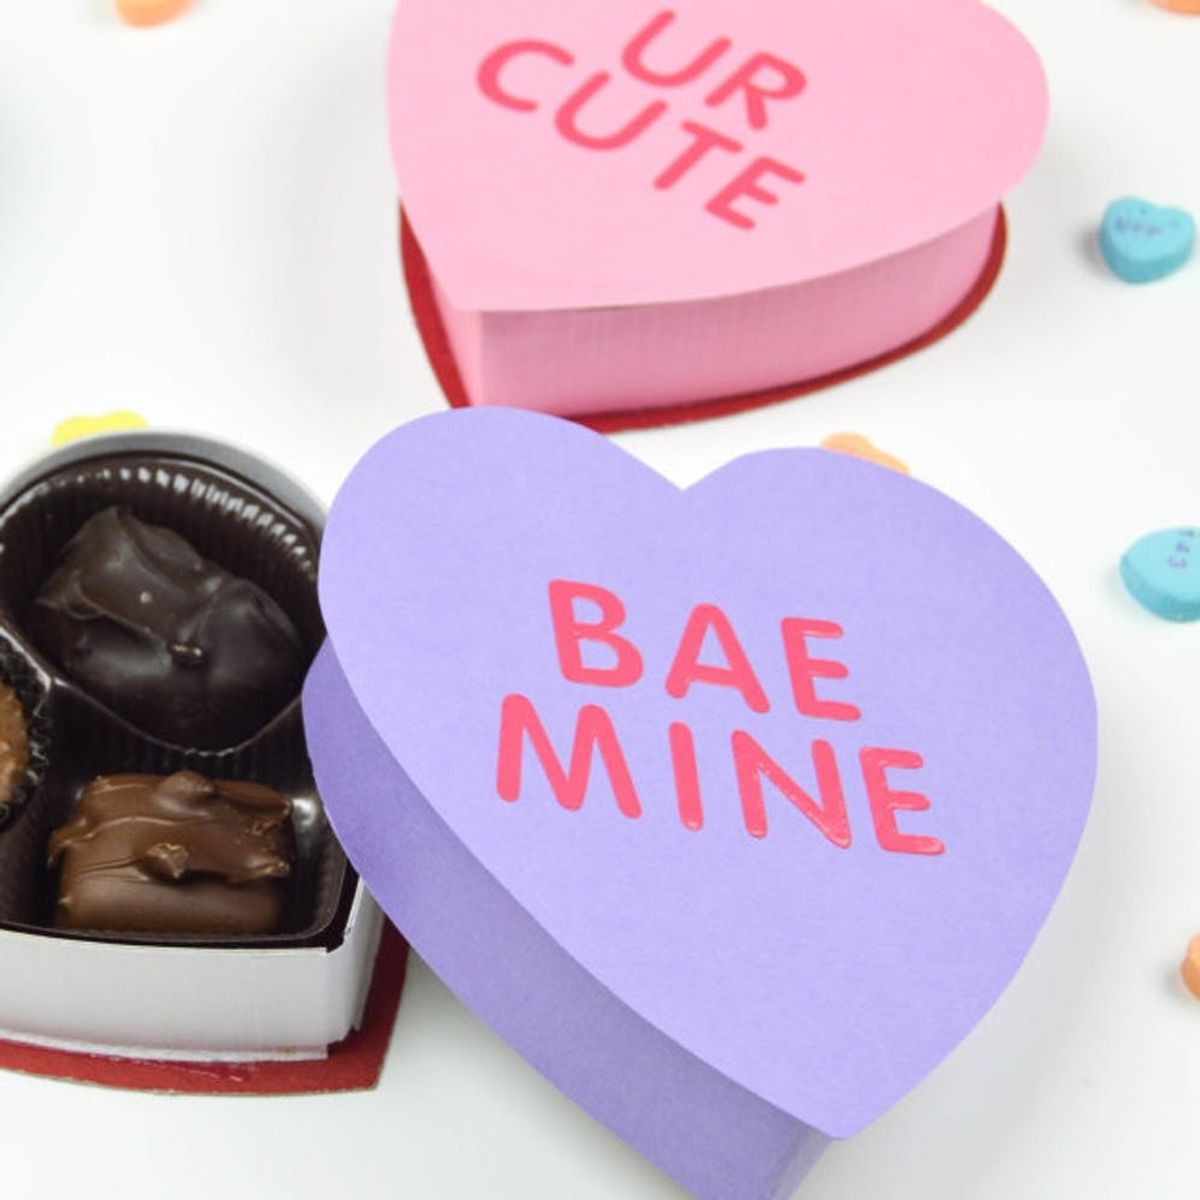 17 Conversation Heart DIYs for You and Your Galentines